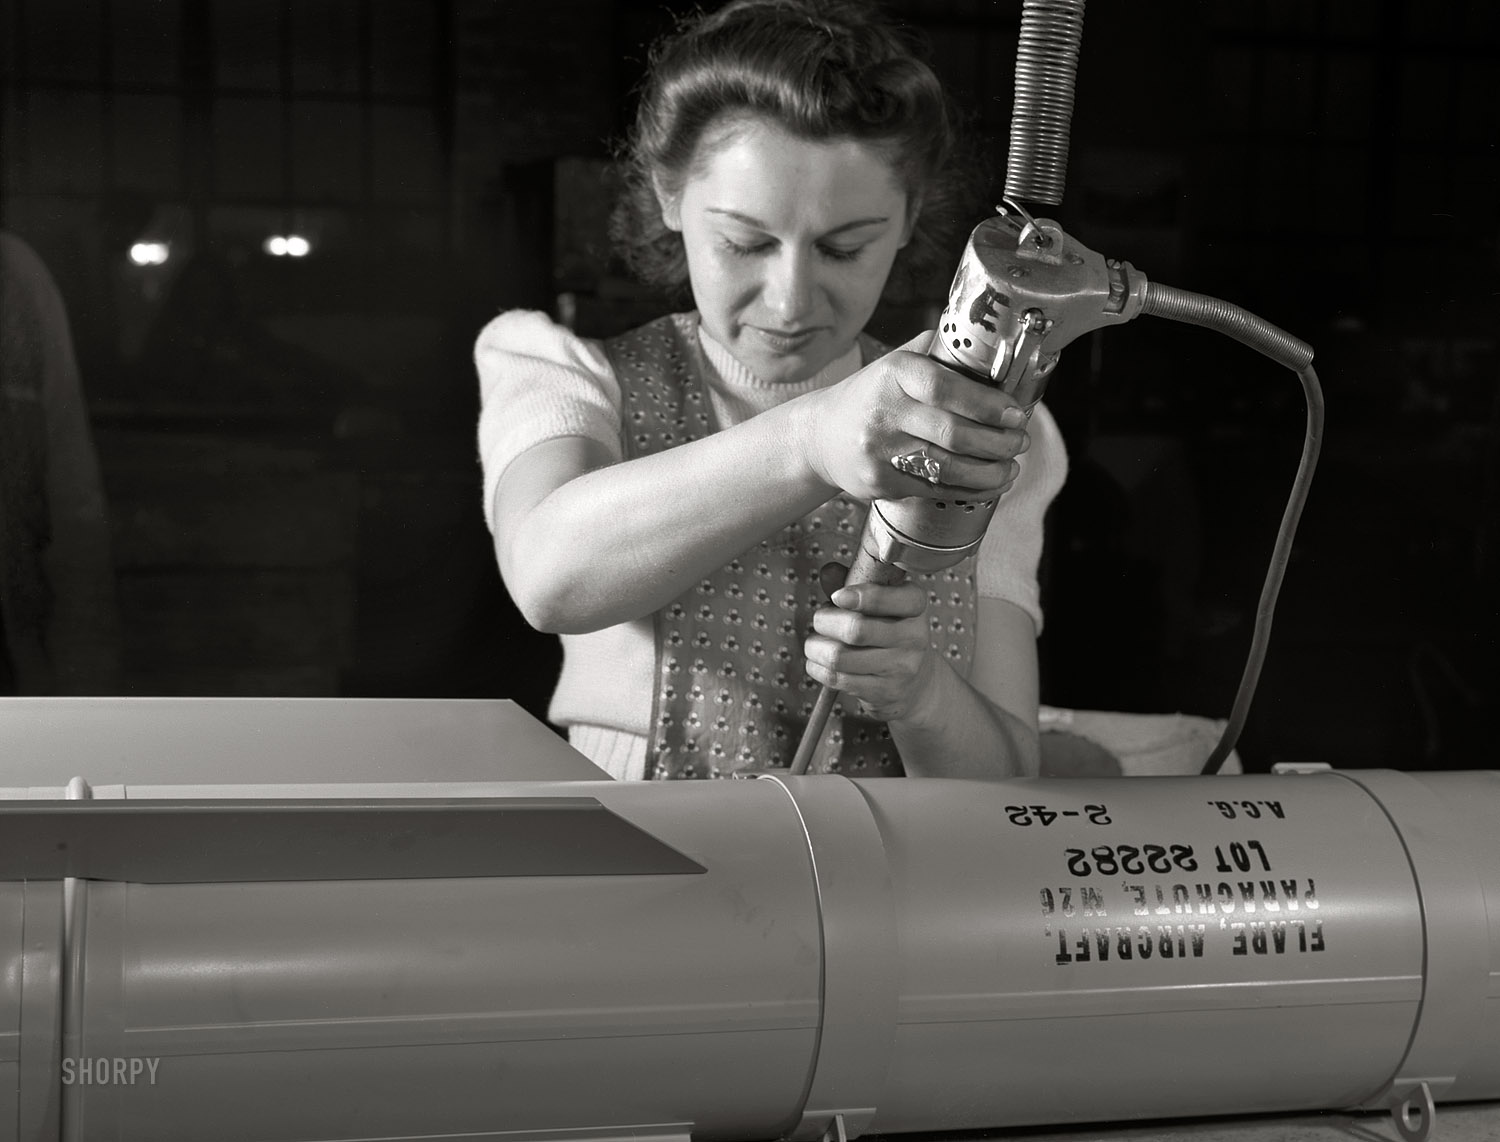 February 1942.  A.C. Gilbert Company, New Haven, Connecticut. "Conversion. Toy factory. Stephanie Cewe's skill with this electric screwdriver has been turned to the aid of Uncle Sam's war machine. Stephanie used to assemble toy locomotives; today, she uses the same screwdriver to assemble parachute flare casings." Photo by Howard Hollem, Office of War Information. View full size.